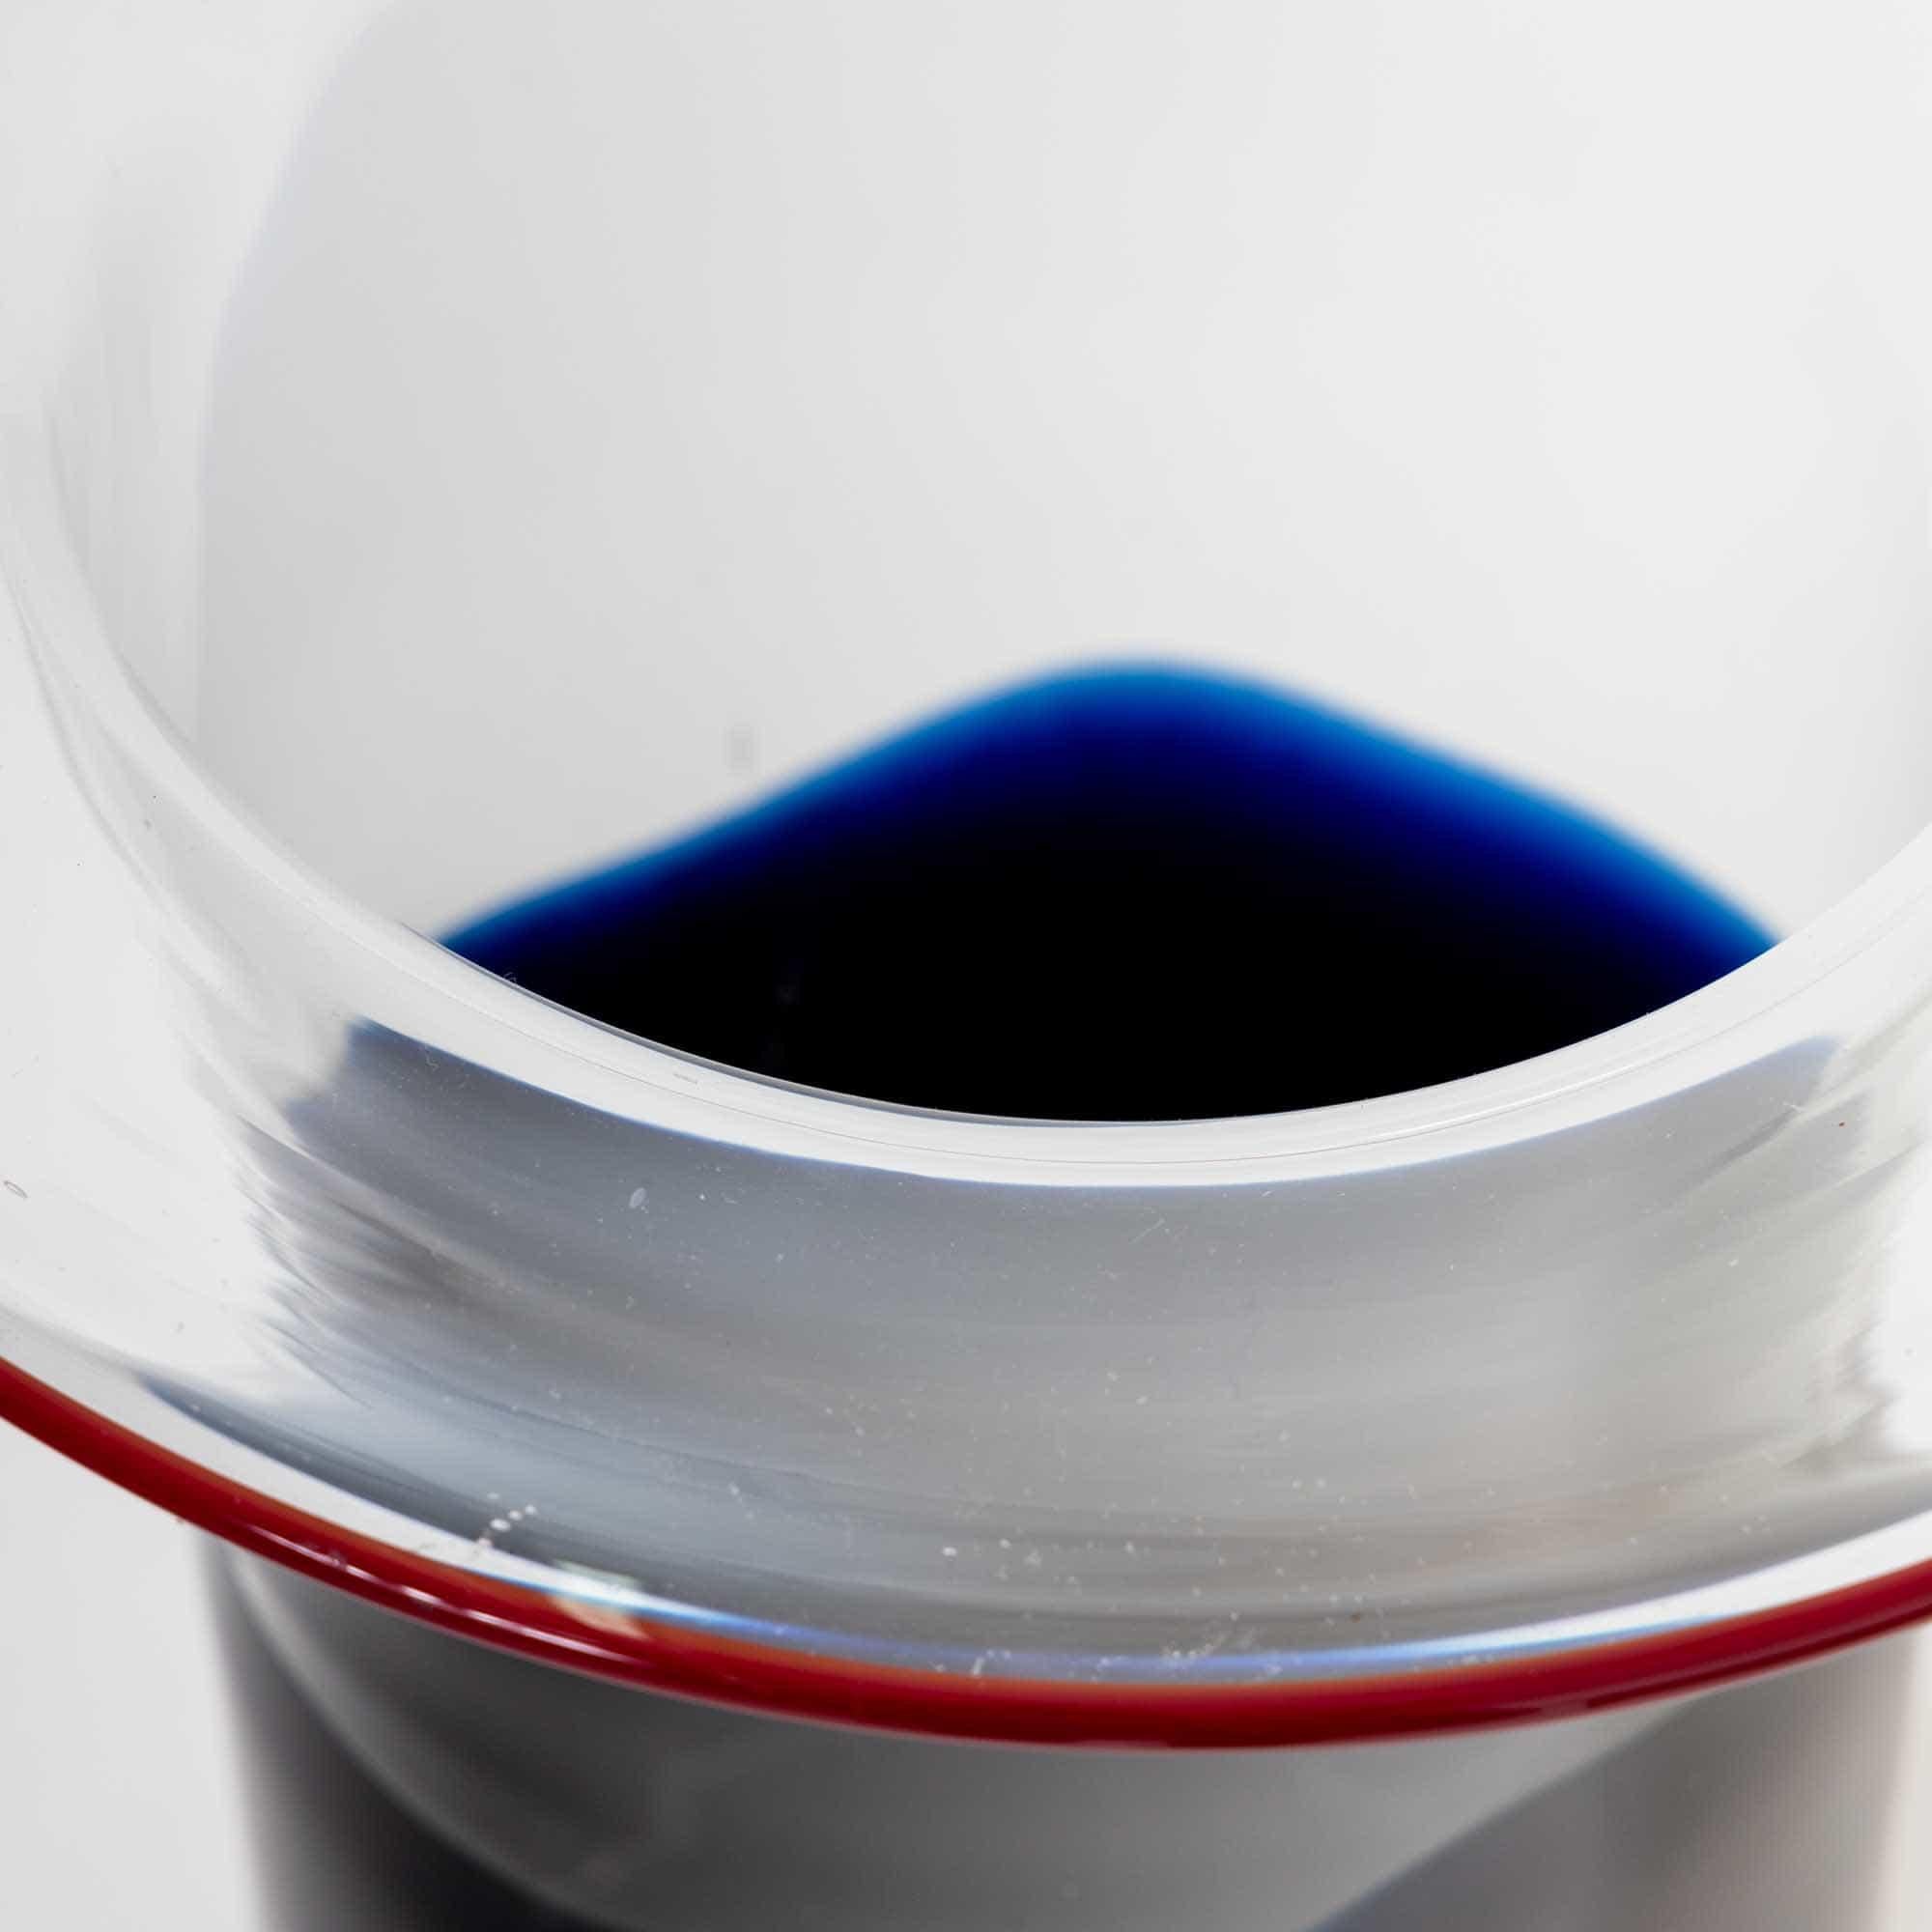 Large Murano glass vase in a cylindrical shape. The clear glass is set off in red at the edge and changes to dark blue at the bottom.